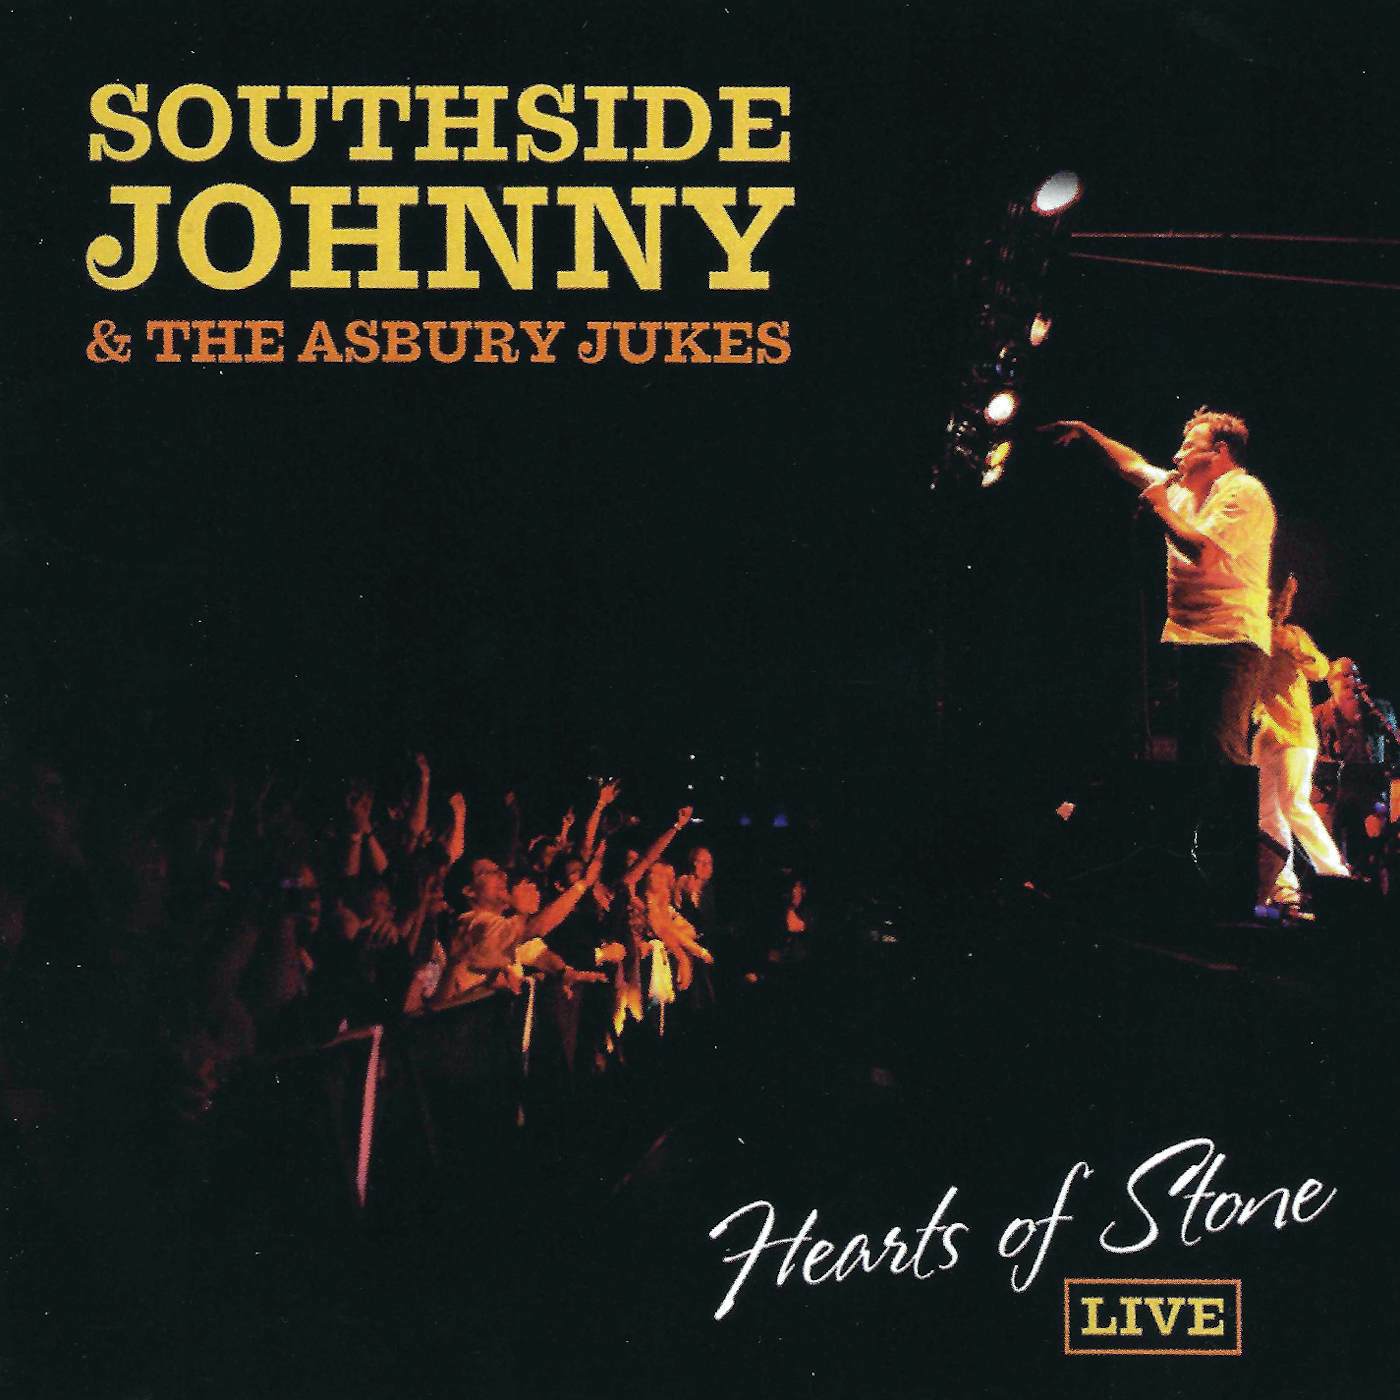 Southside Johnny And The Asbury Jukes HEARTS OF STONE LIVE CD